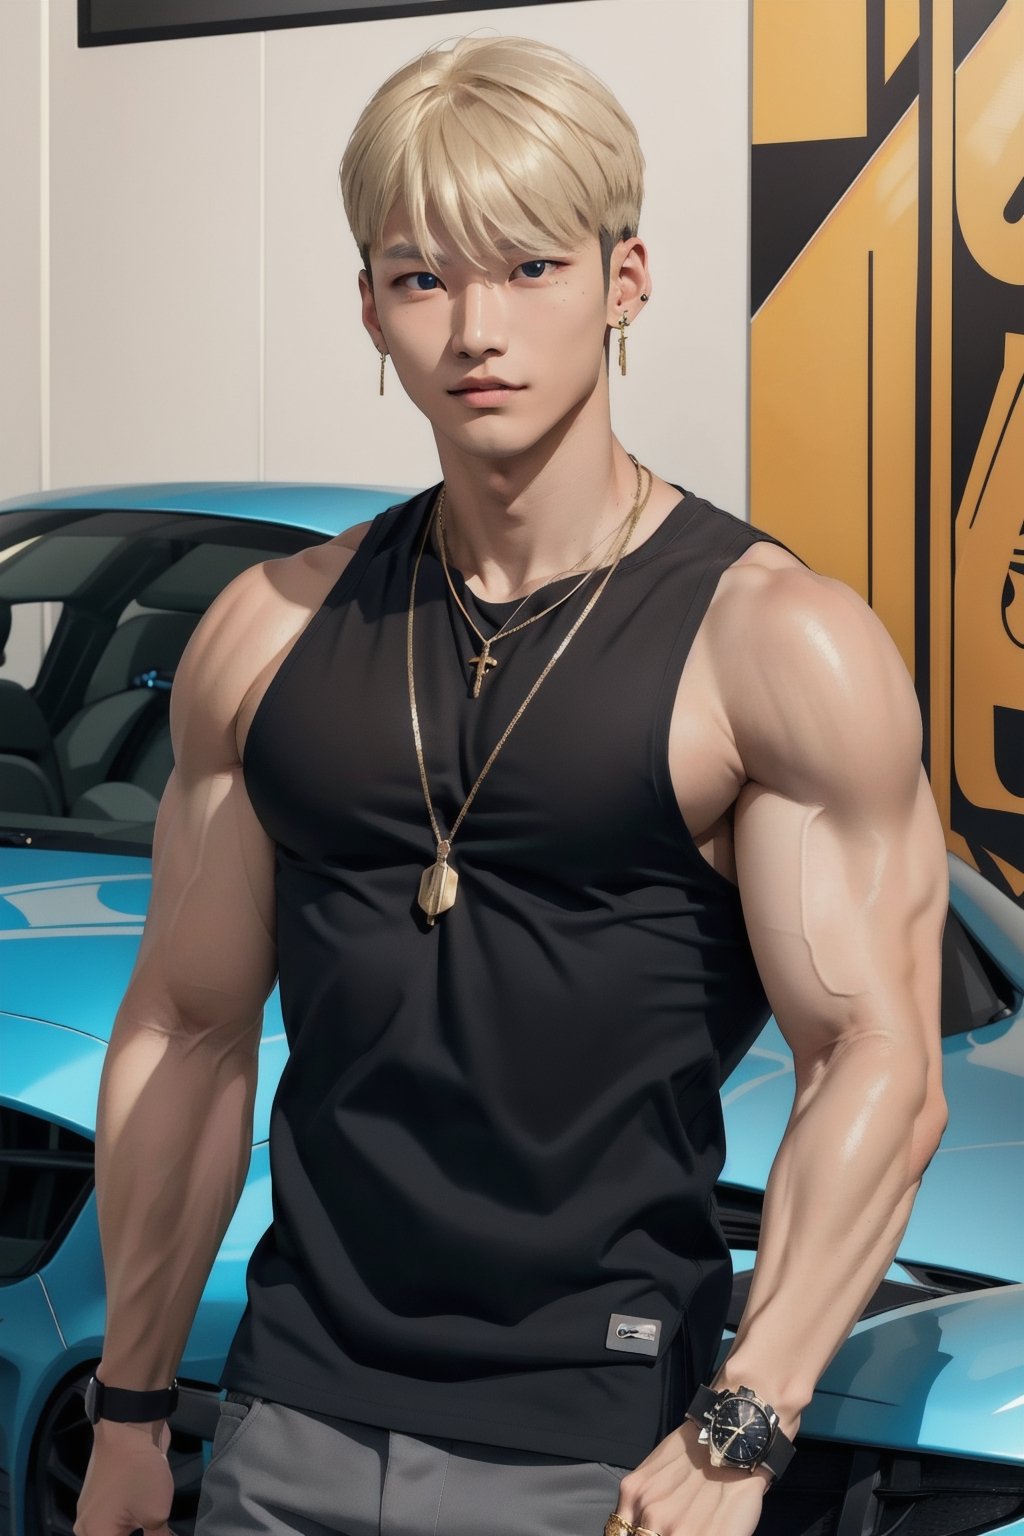 intricate detail, 18 year old, young handsome asian male wearing black tanktop, kpop,ikemen, blue eyes, handsome, earrings, gold necklace, luxuary golden omega watch,  blond hair, big muscle, physique, fitness model, wealthy, in front of glittering blue color supercar